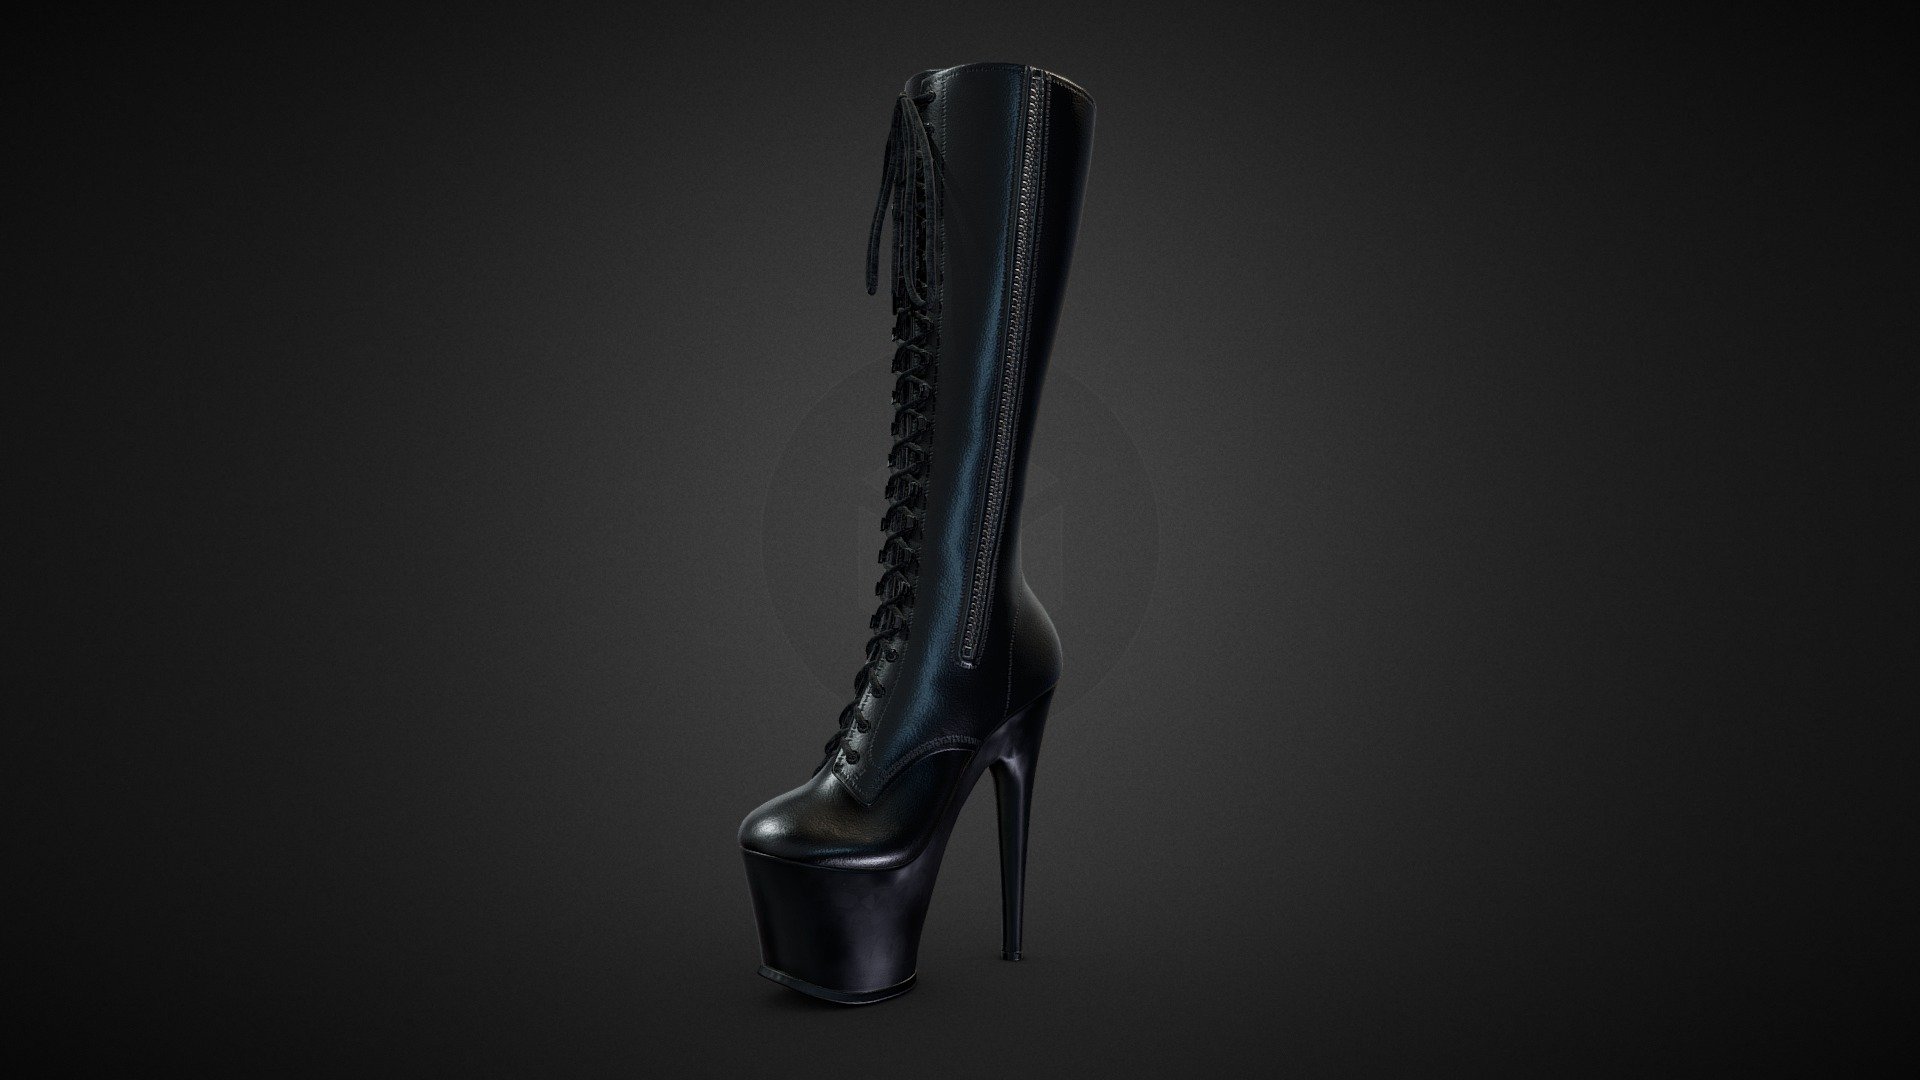 Knee High Stiletto Heels Boots

Game and production ready

Single UV space

PBR and UE4 4k Textures

Low Poly has 15k quads

FBX and OBJ - Knee High Stiletto Heels Boots - Buy Royalty Free 3D model by Feds452 3d model